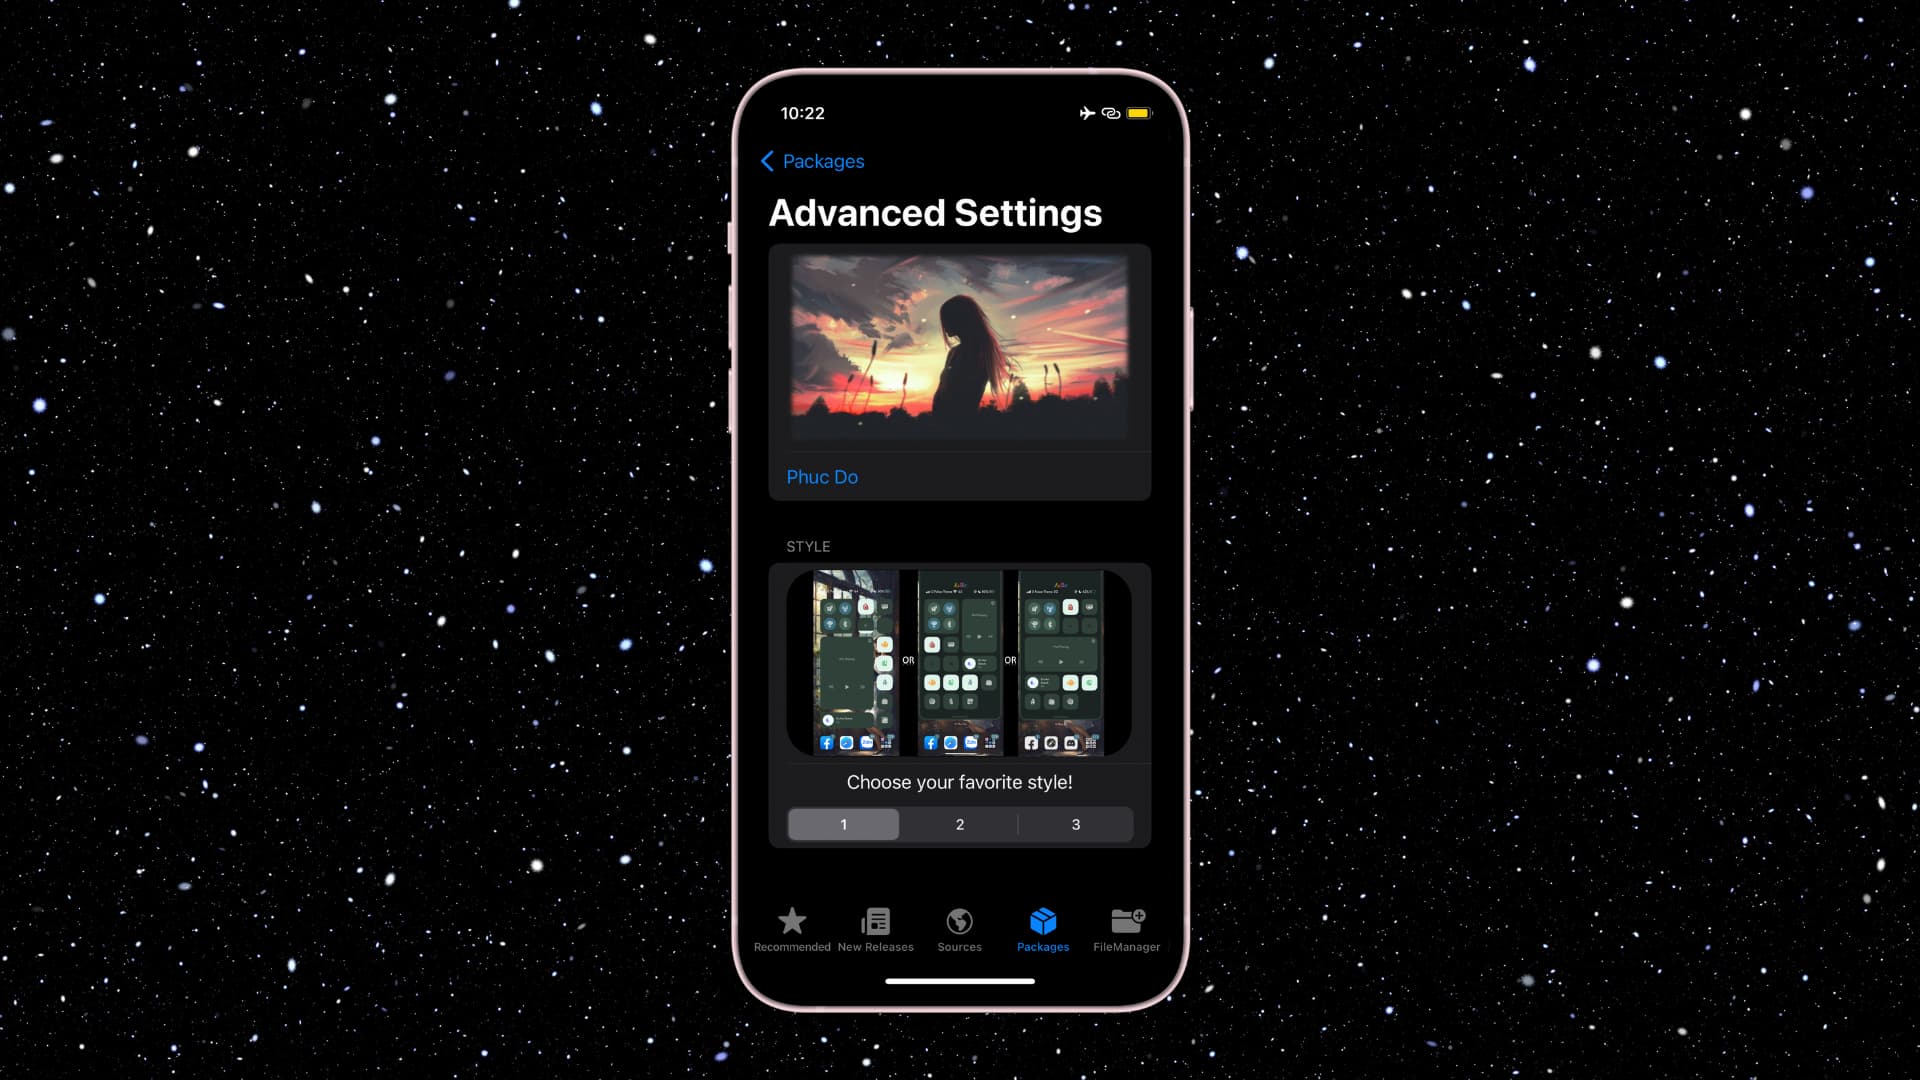 CC Mod iOS 15 lets users reconfigure their Control Center layout in exciting new ways